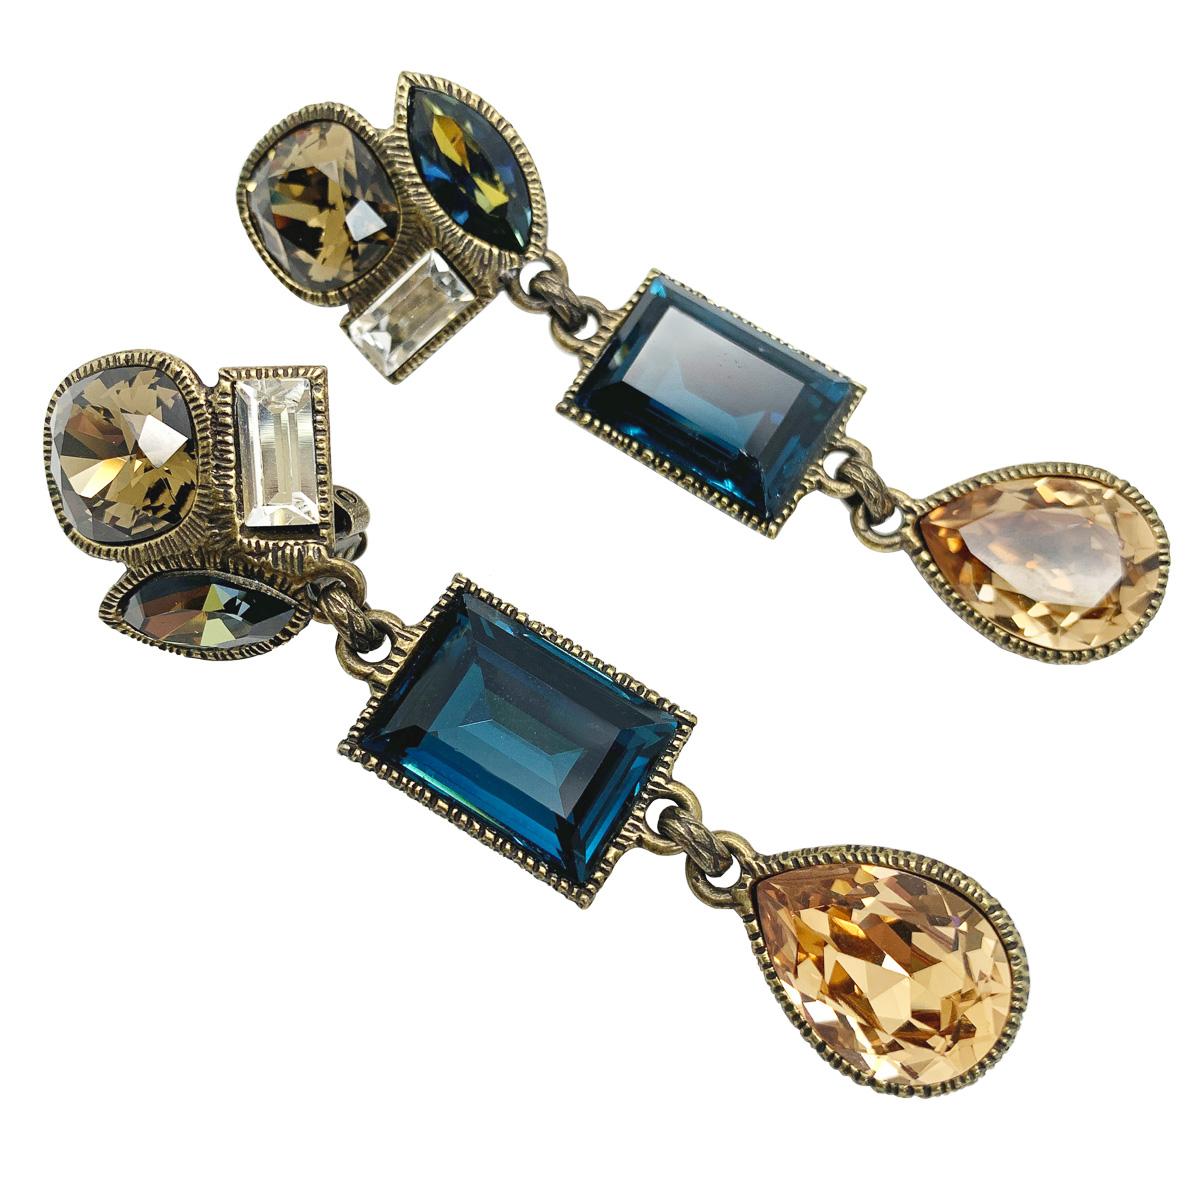 A divine pair of Vintage Philippe Ferrandis Earrings. Featuring a myriad of fancy cut crystals in earthy tones including citrine alongside deepest sapphire blue.

Vintage Condition: Very good without damage or noteworthy wear.
Materials: bronzed